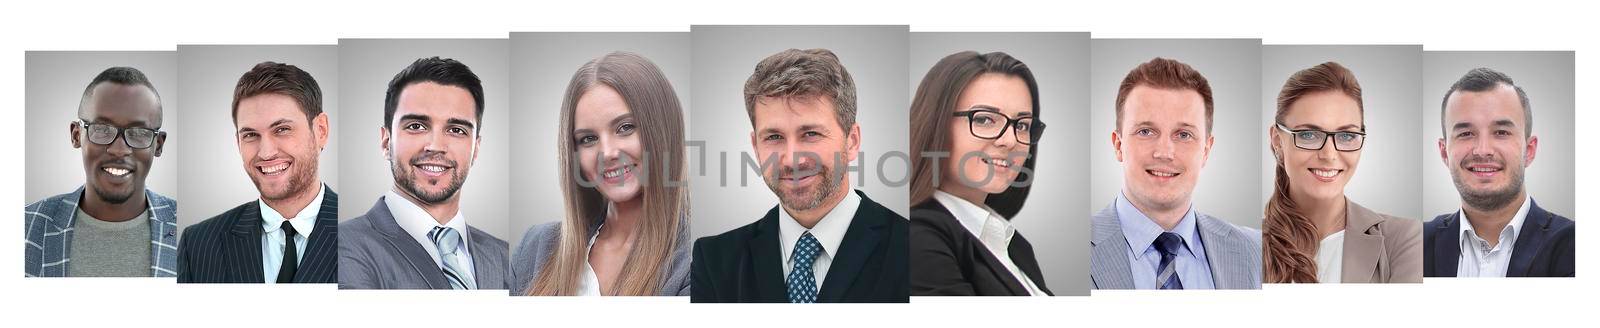 panoramic collage of portraits of young entrepreneurs. by asdf